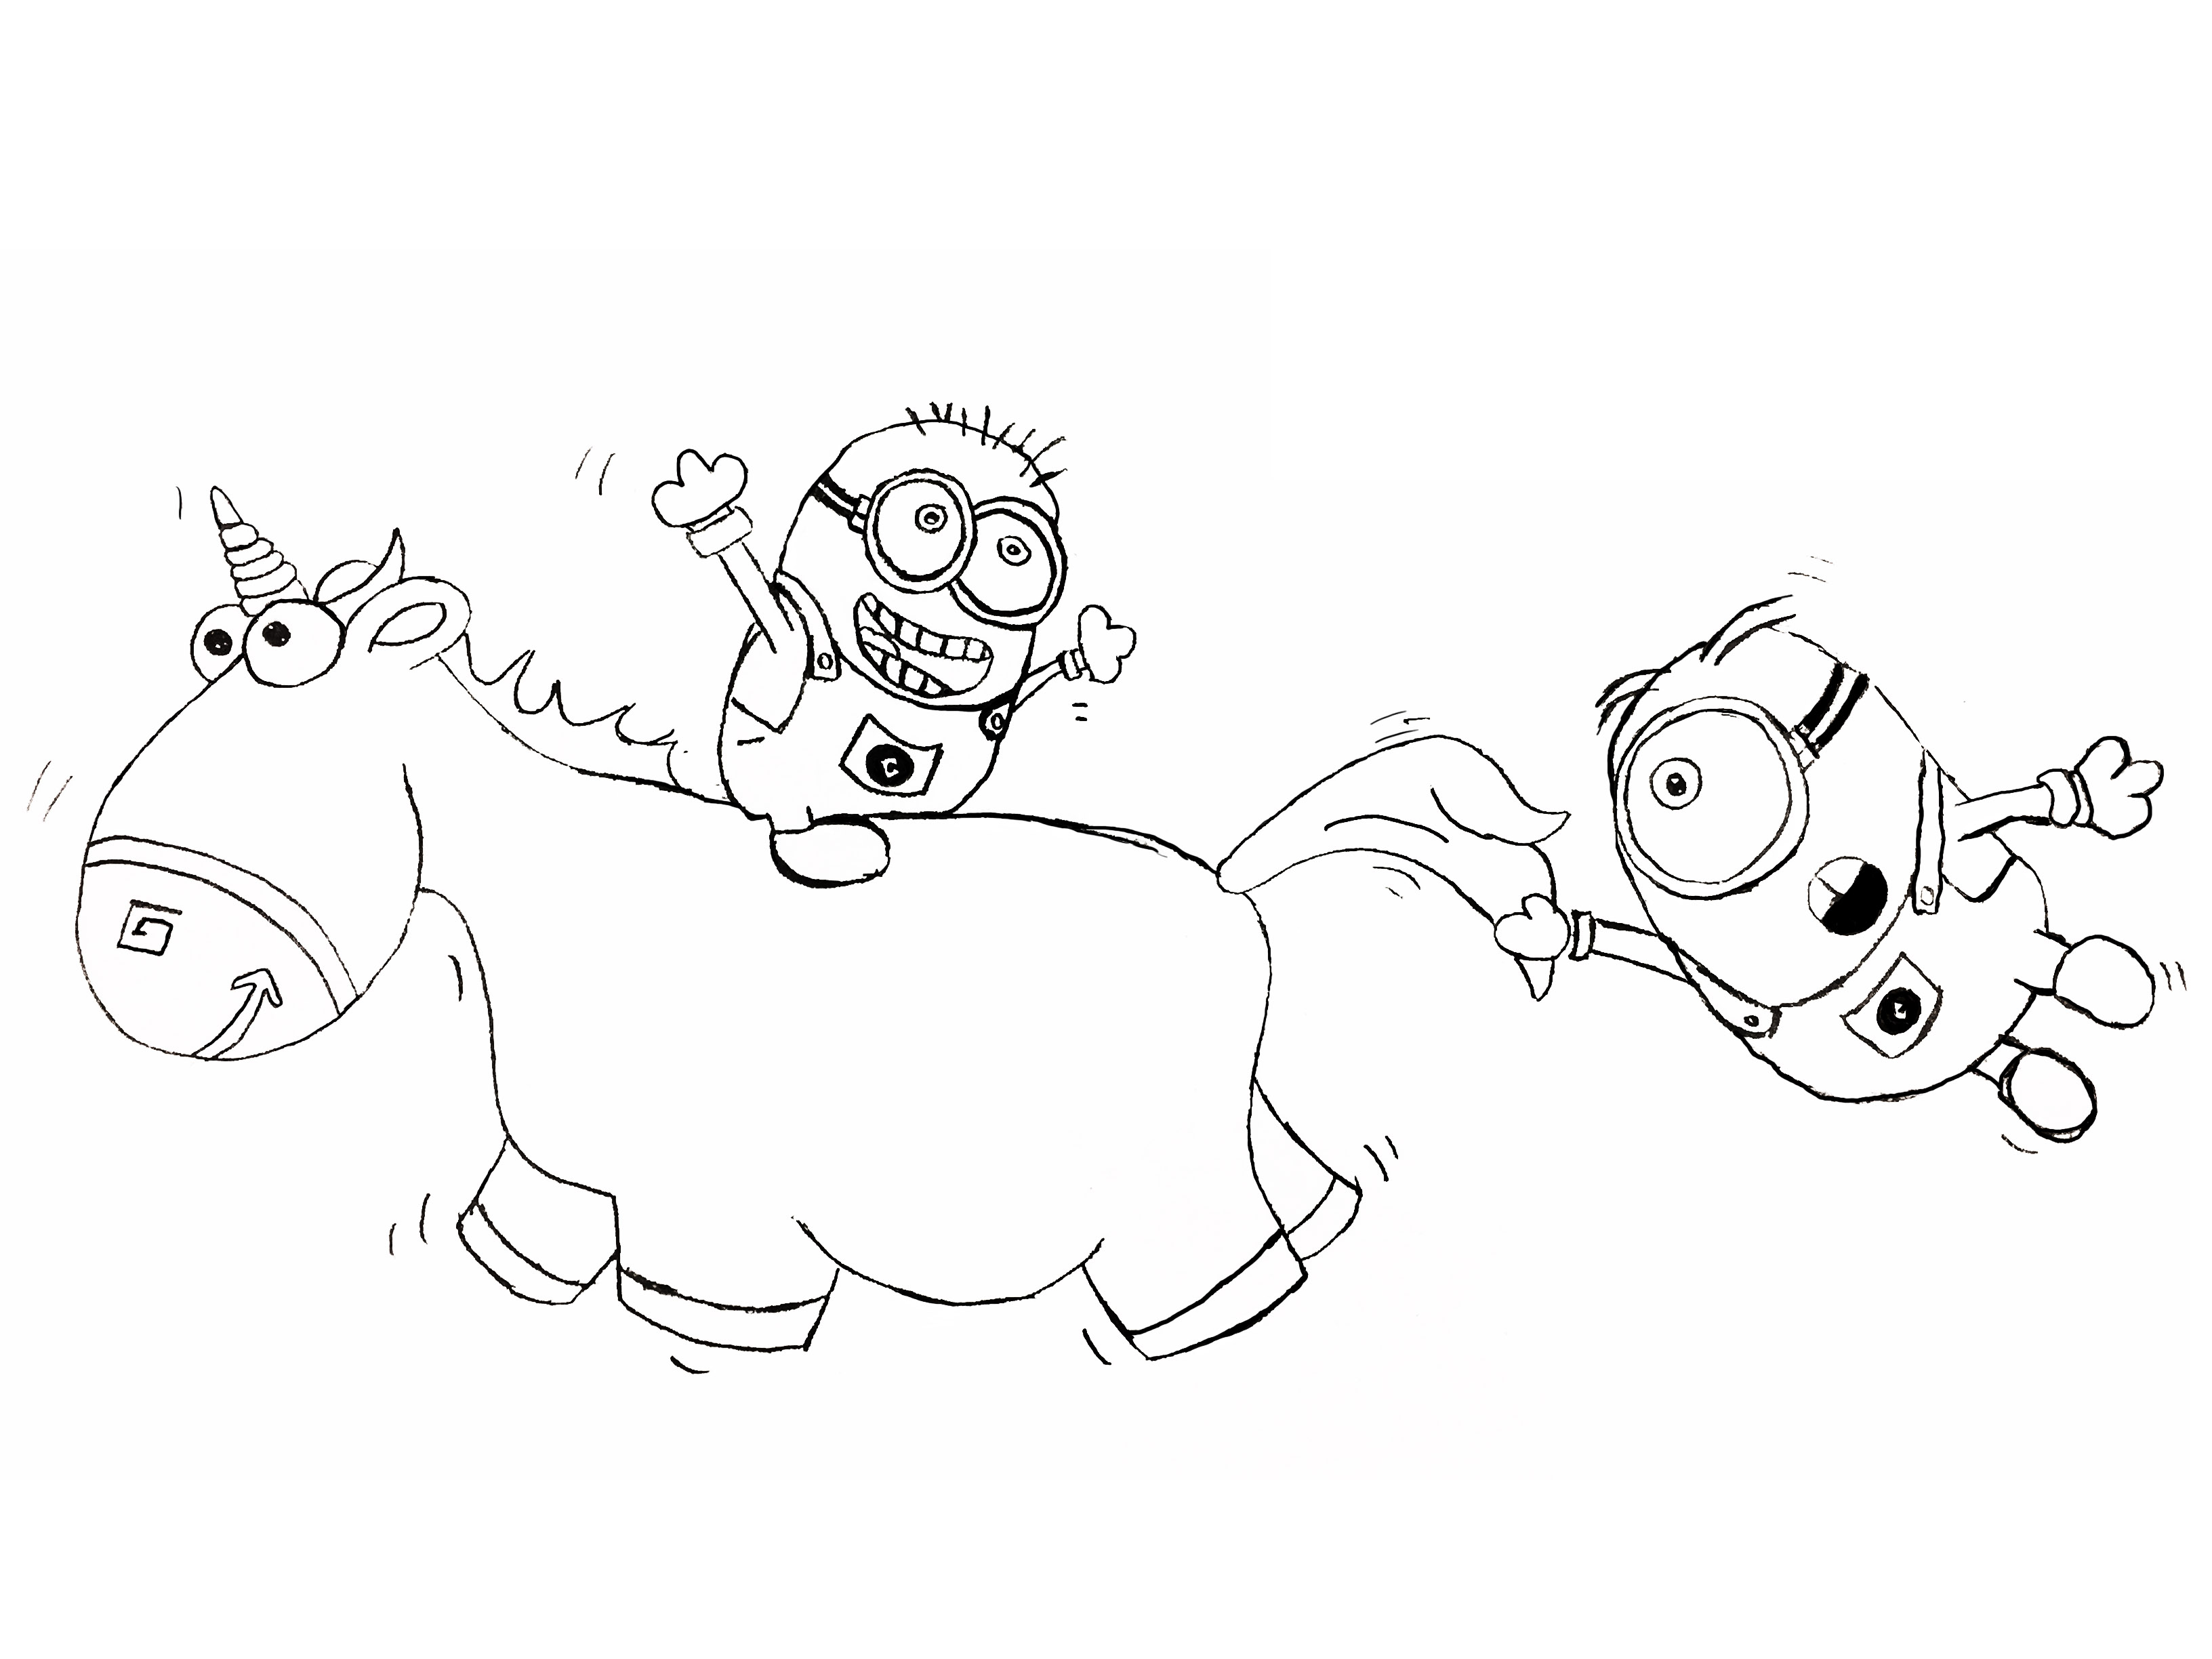 The Minions have fun with an adorable Unicorn!